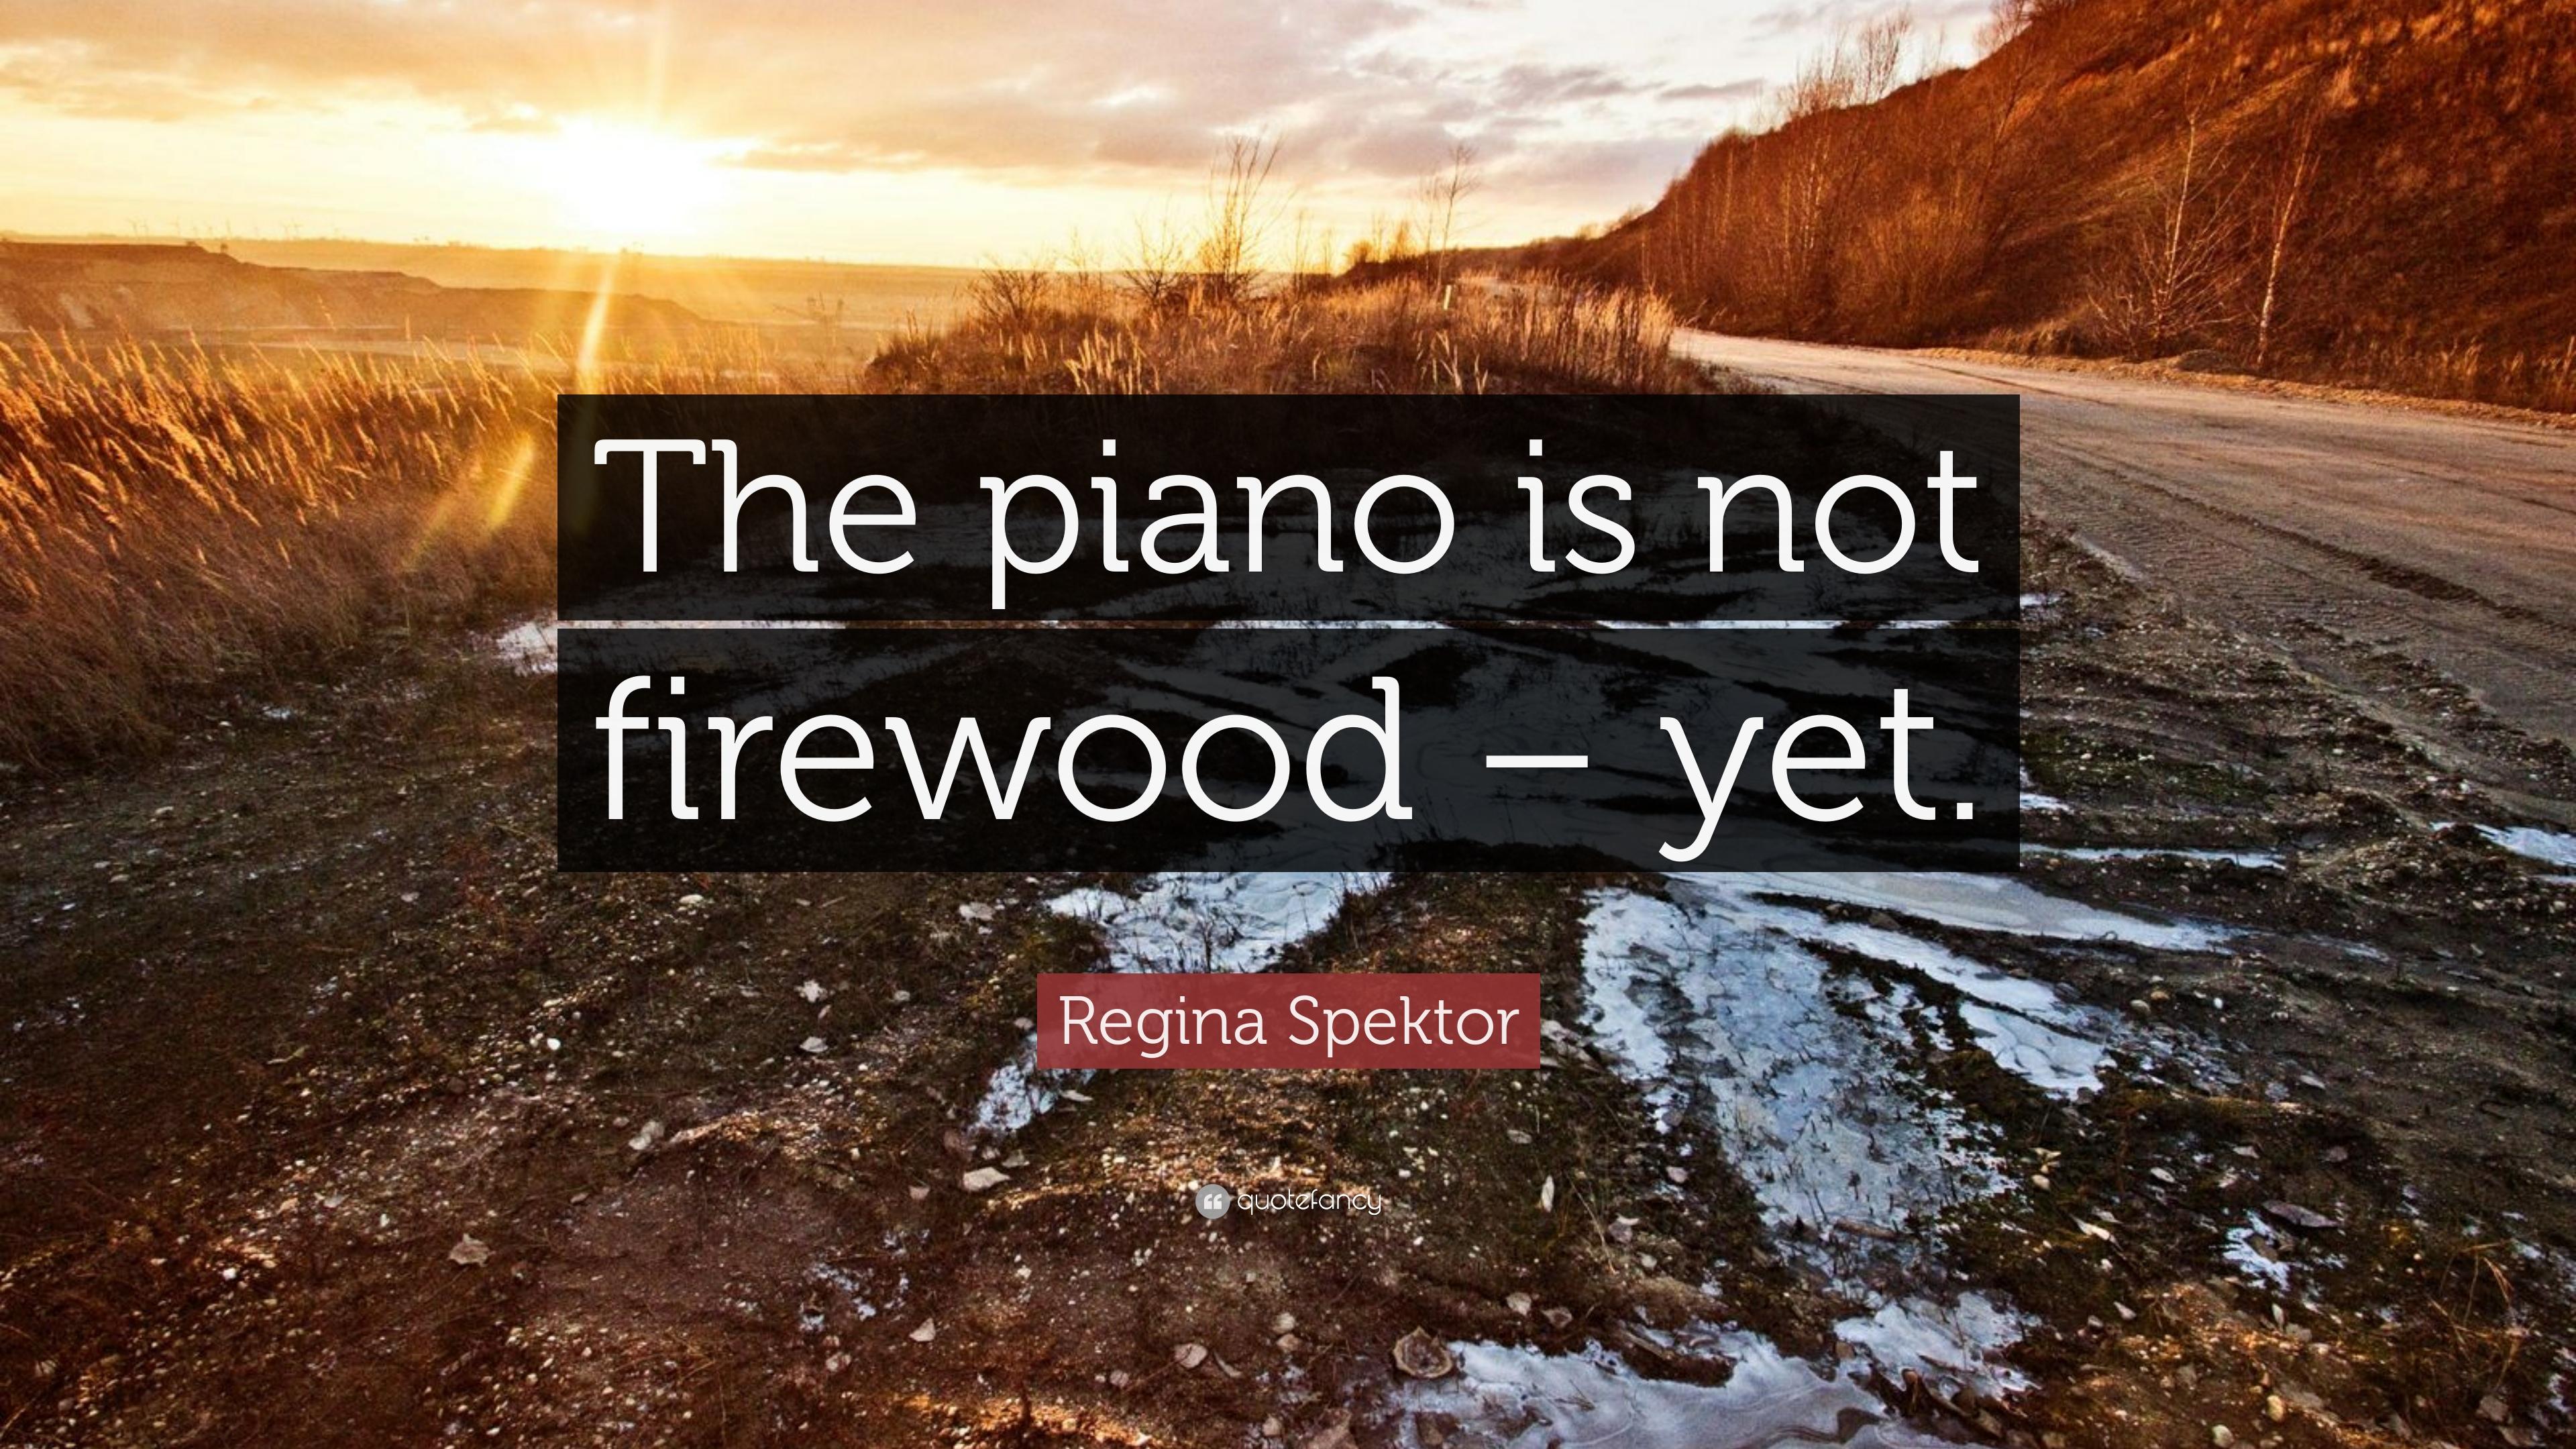 Regina Spektor Quote: “The piano is not firewood